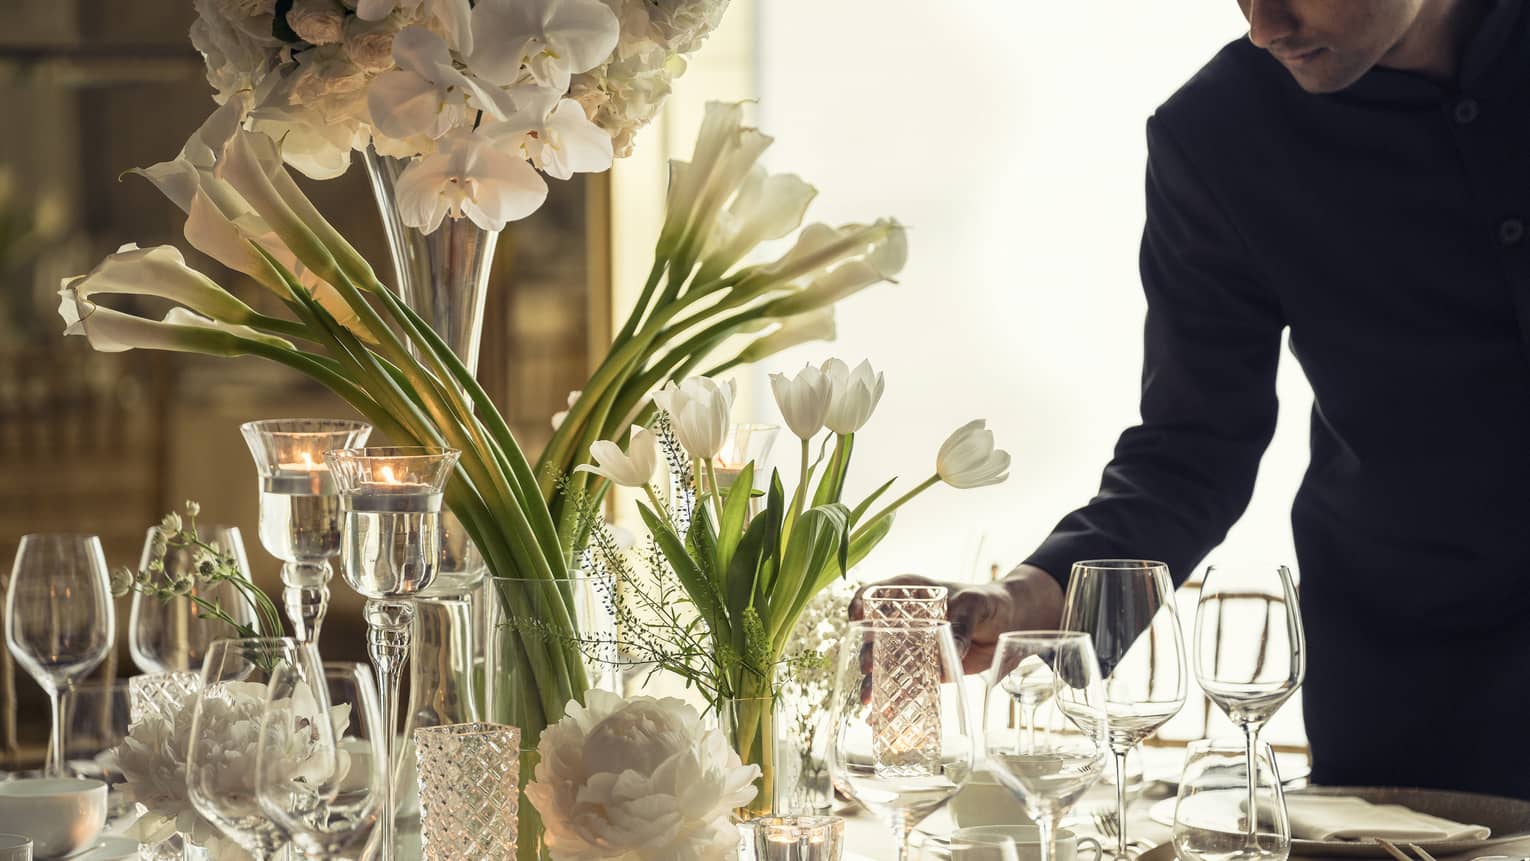 Hotel staff sets elegant banquet dining table with crystal glasses, vases with white flowers